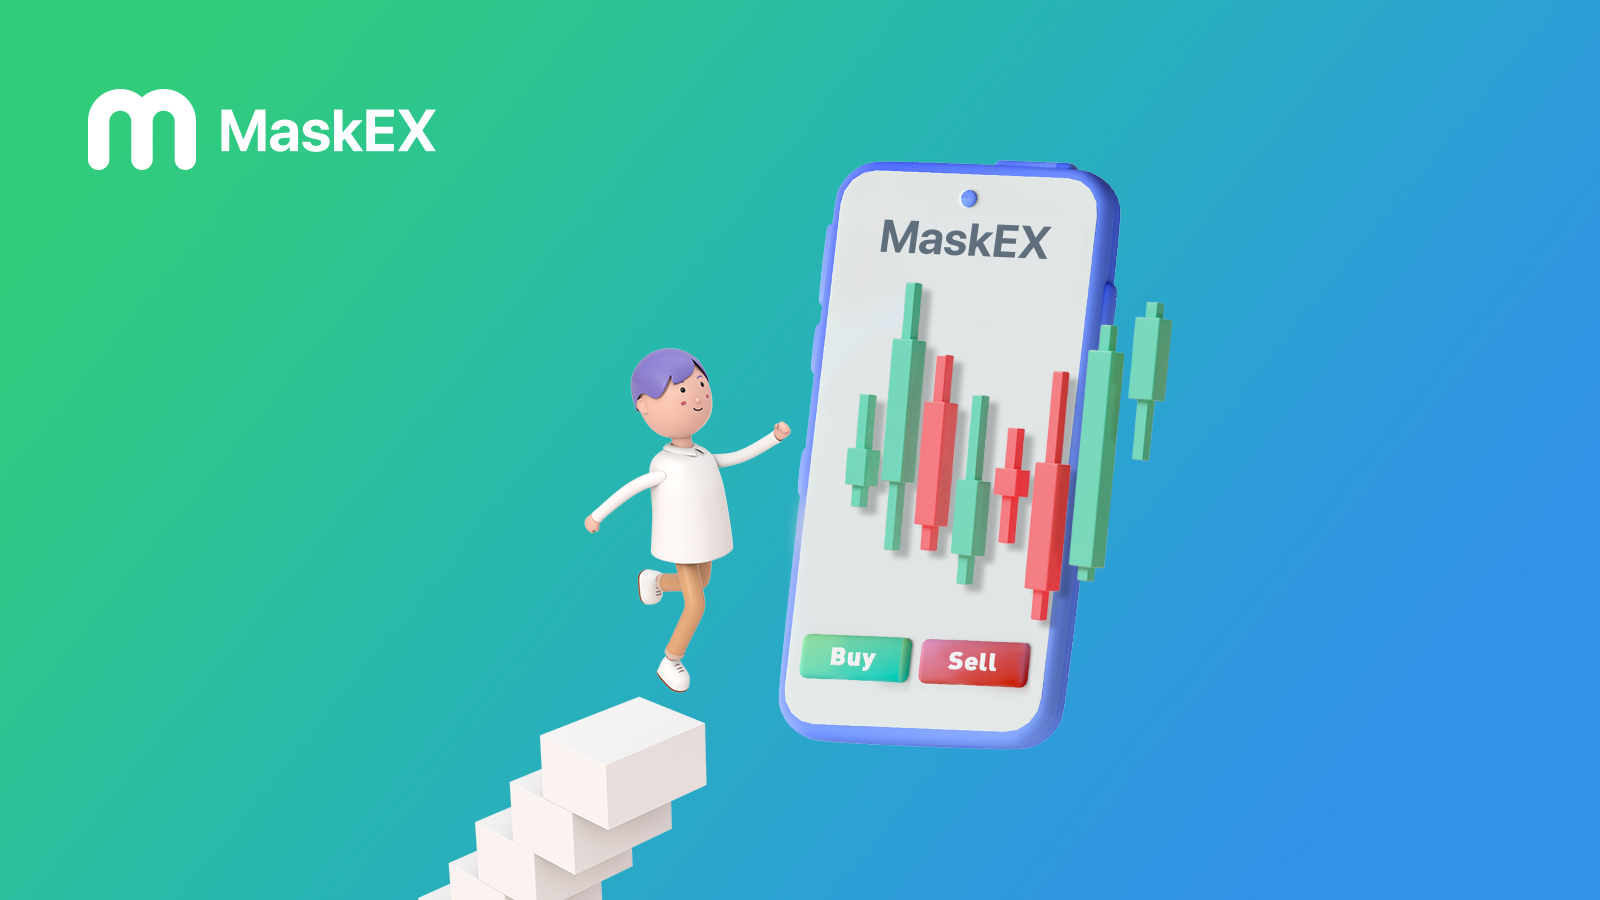 Getting Started with Demo Trading on MaskEX: A Step-by-Step Guide